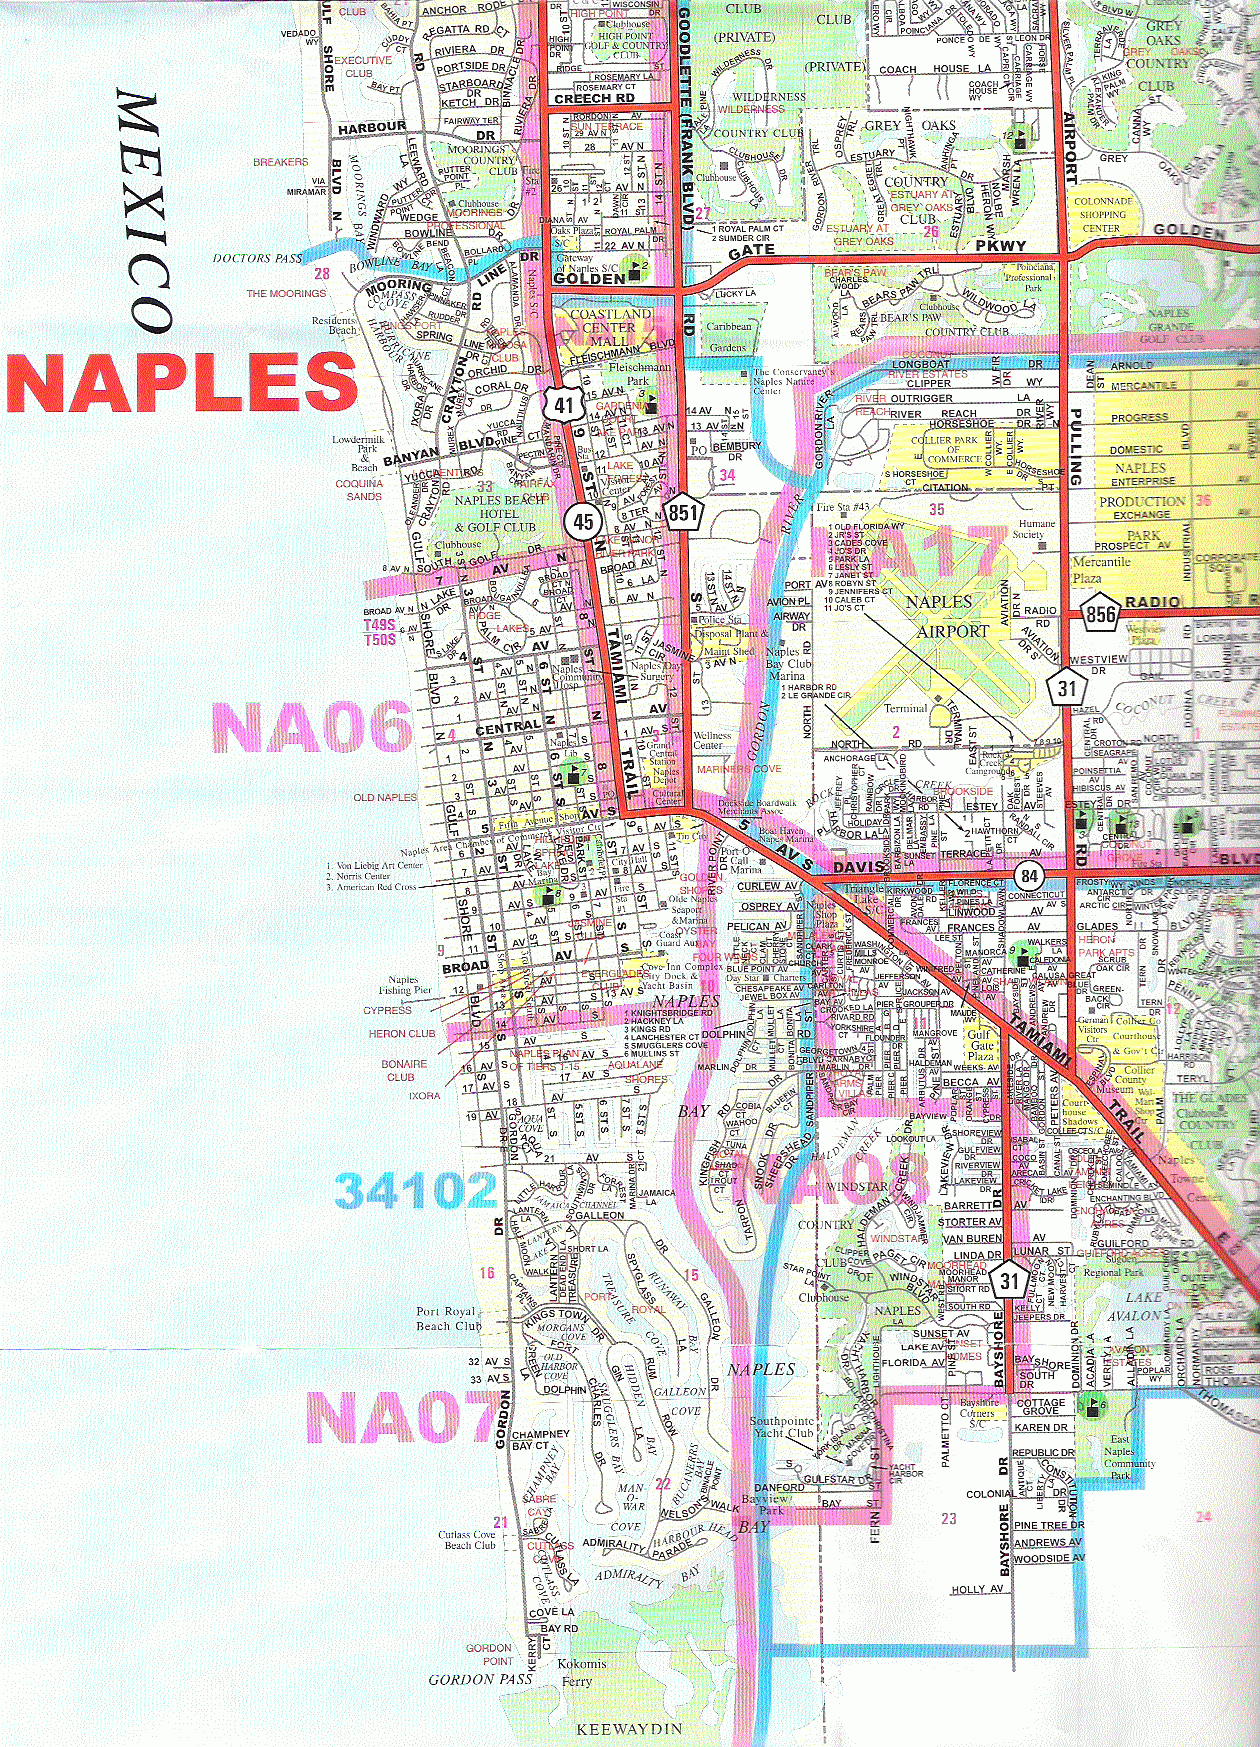 Naples Florida Map From Storage 6 - Ameliabd - Naples On A Map Of Florida